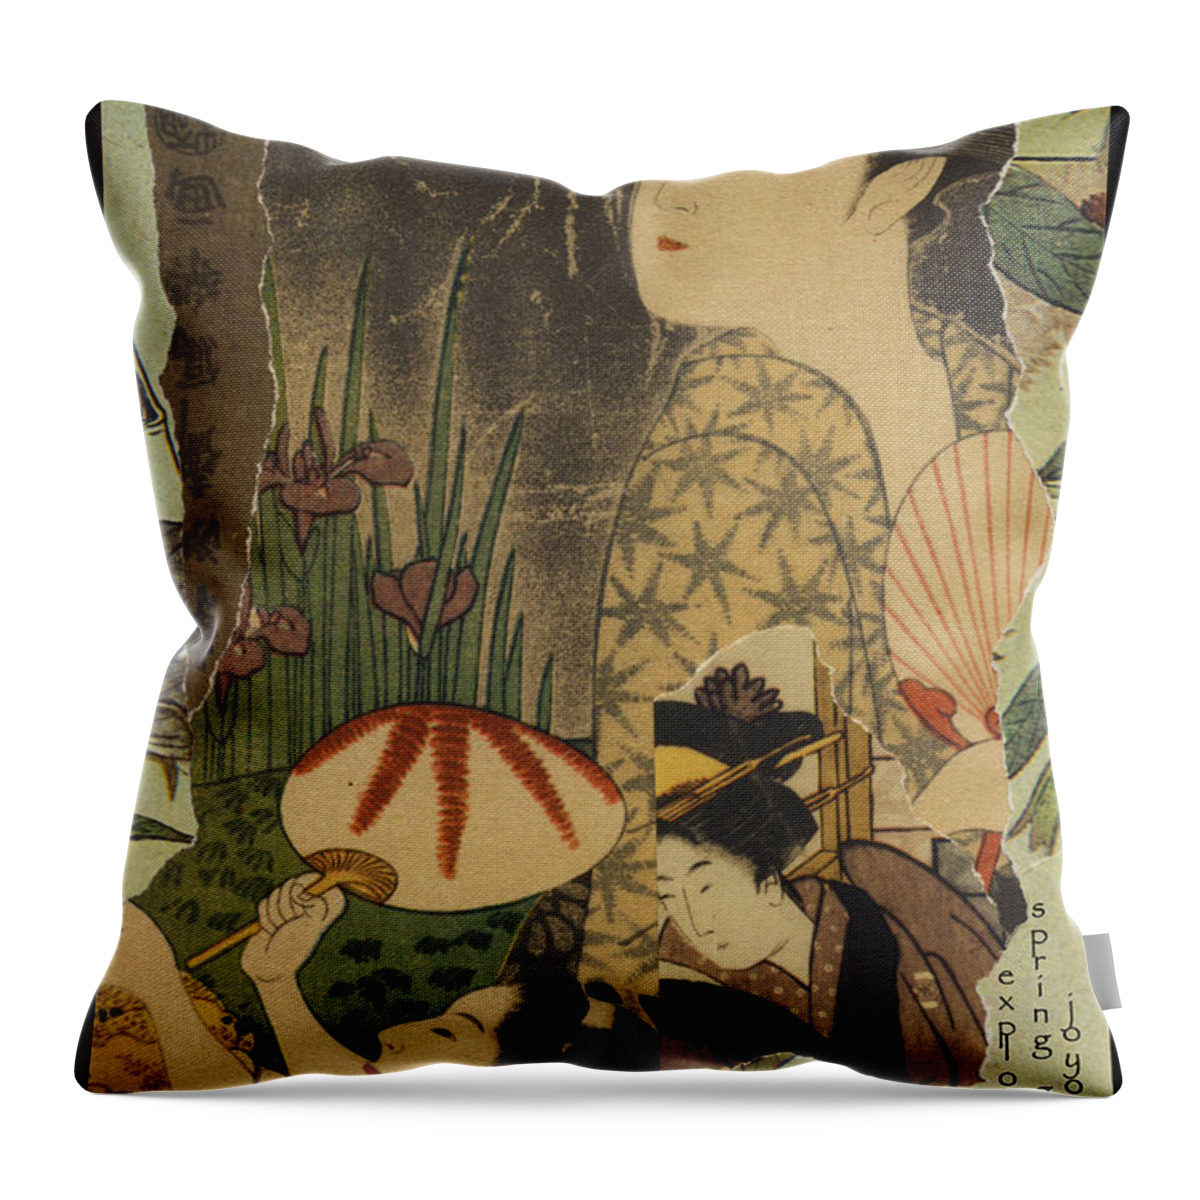 Collage Throw Pillow featuring the digital art Exploring by John Vincent Palozzi